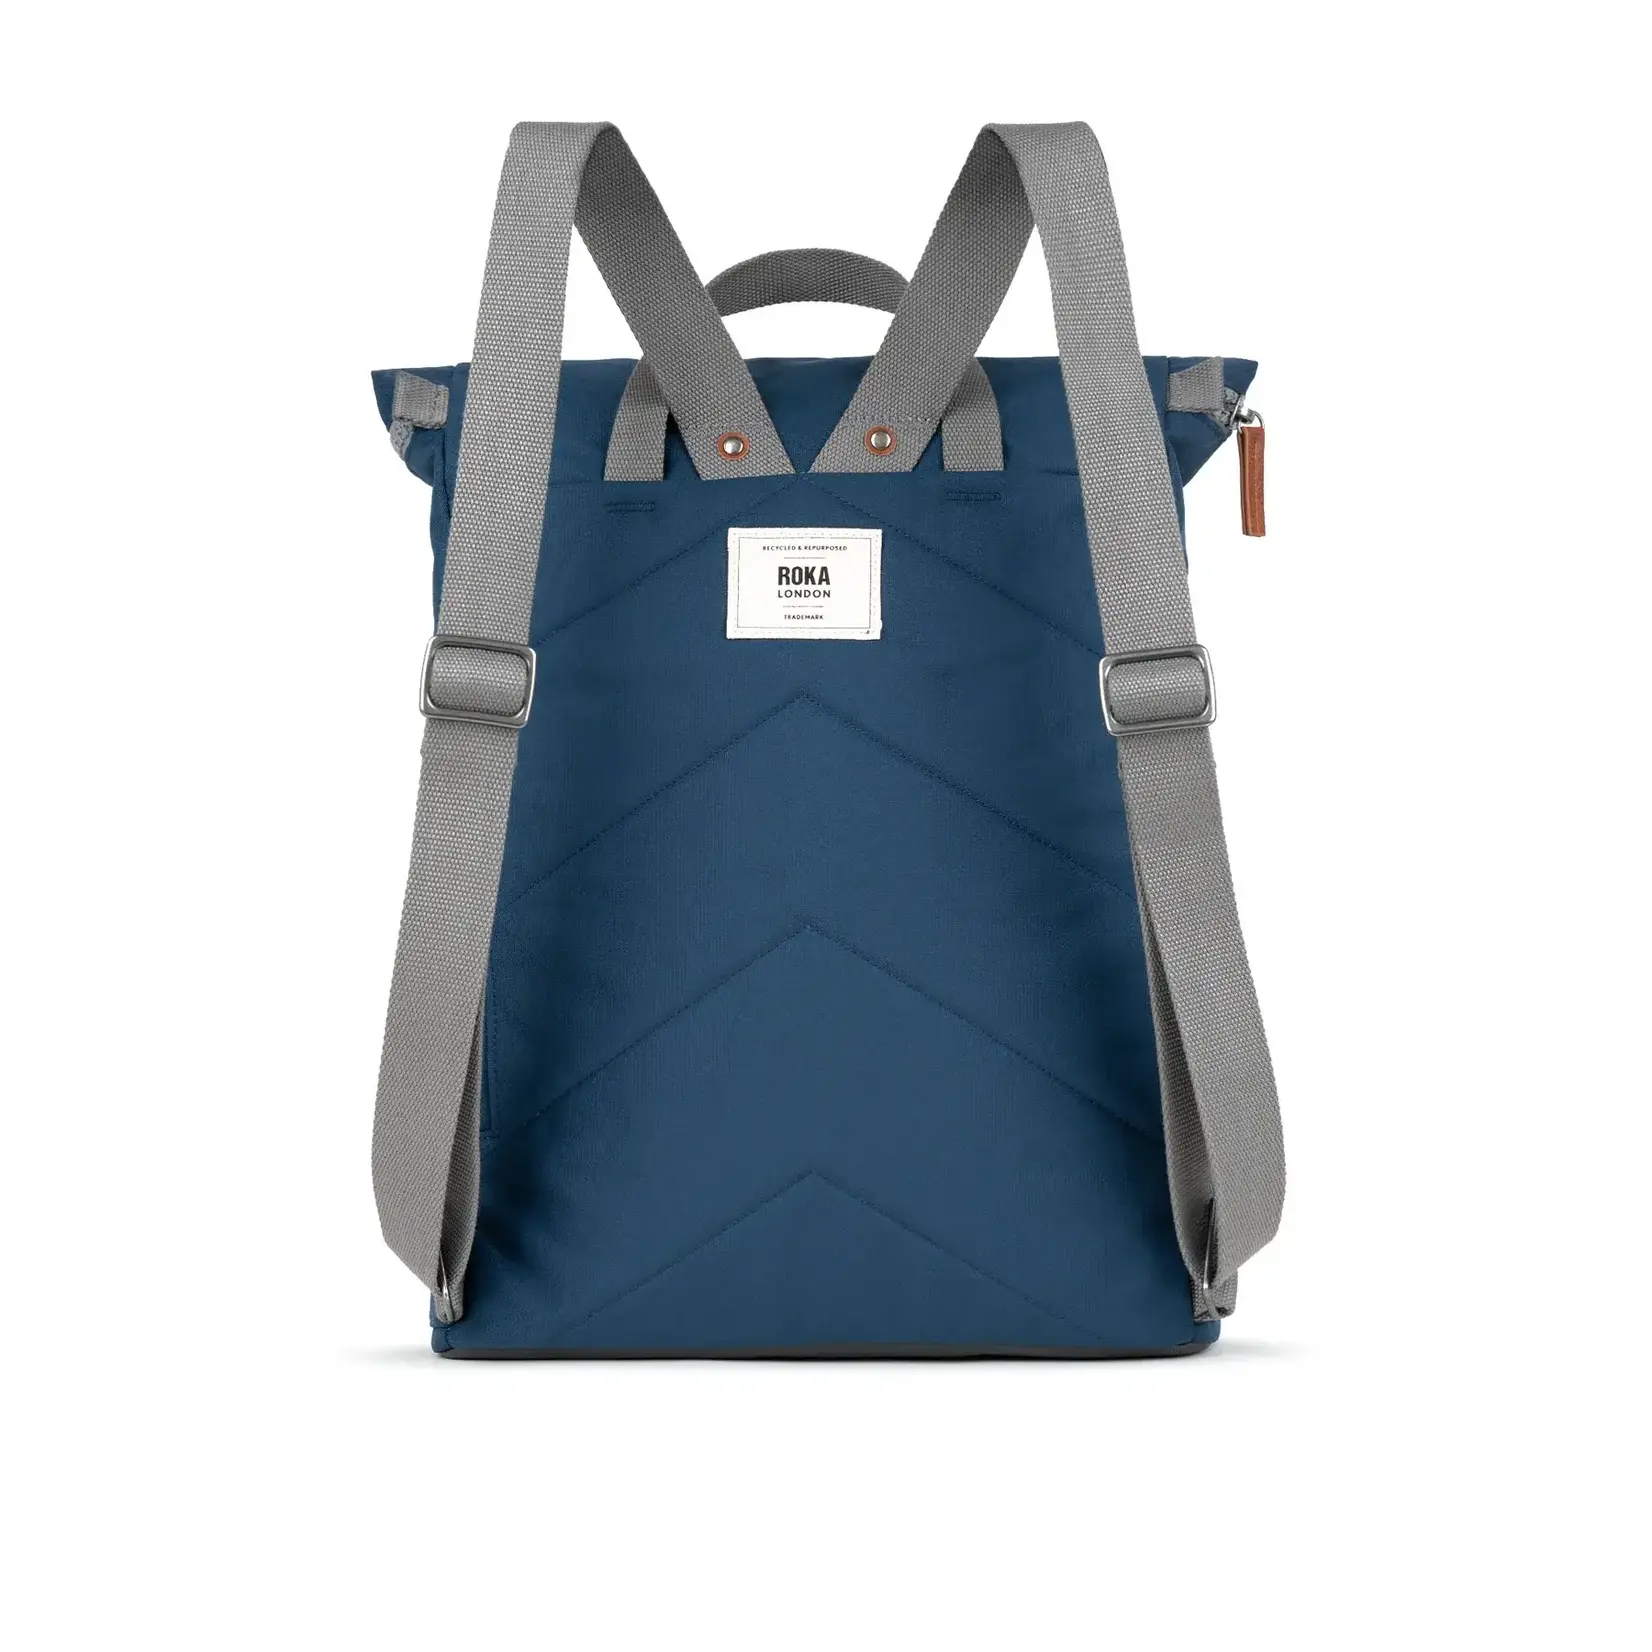 ROKA London Finchley A Deep Blue Recycled Canvas 12-15 recycled bottles